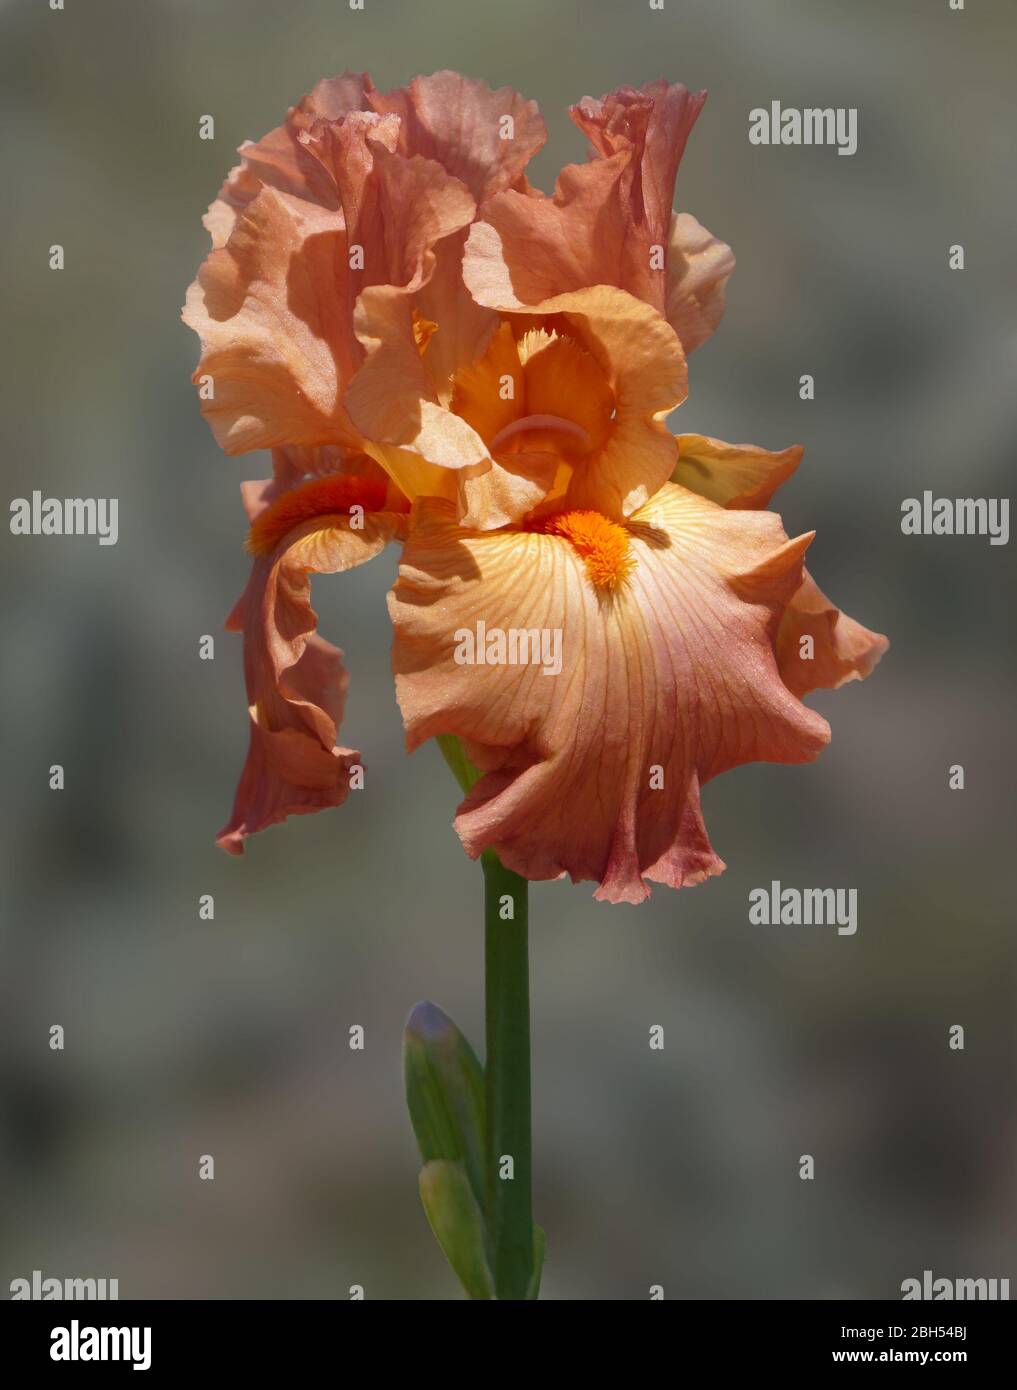 Close up of an iris flower with lacy orange petals, and a bright orange beard. Stock Photo